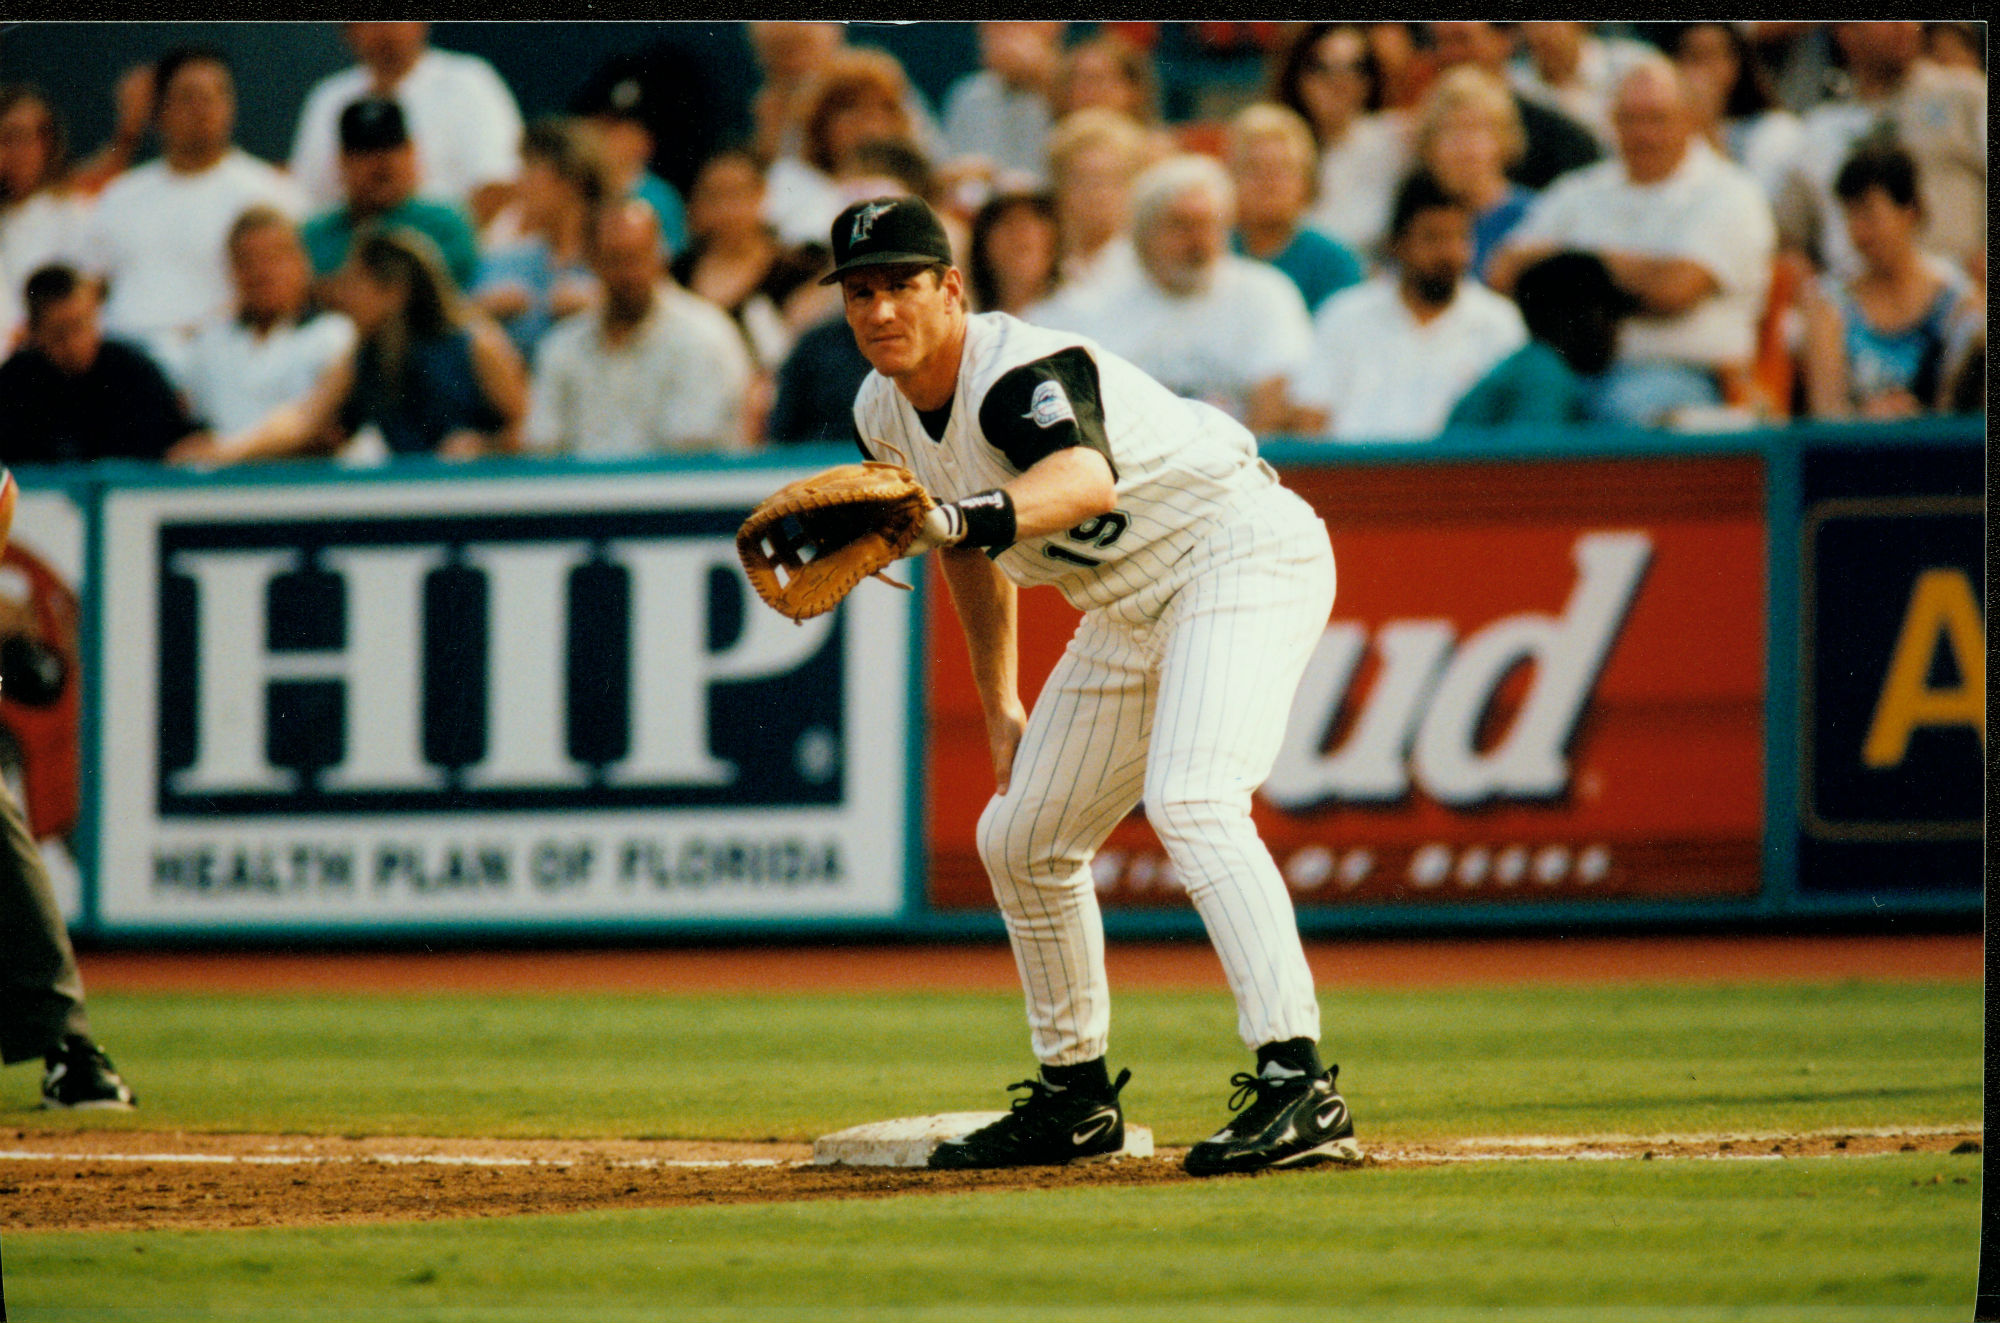 Former Baseball Star Jeff Conine to Host Charity Poker Tournament in South Florida on August 7